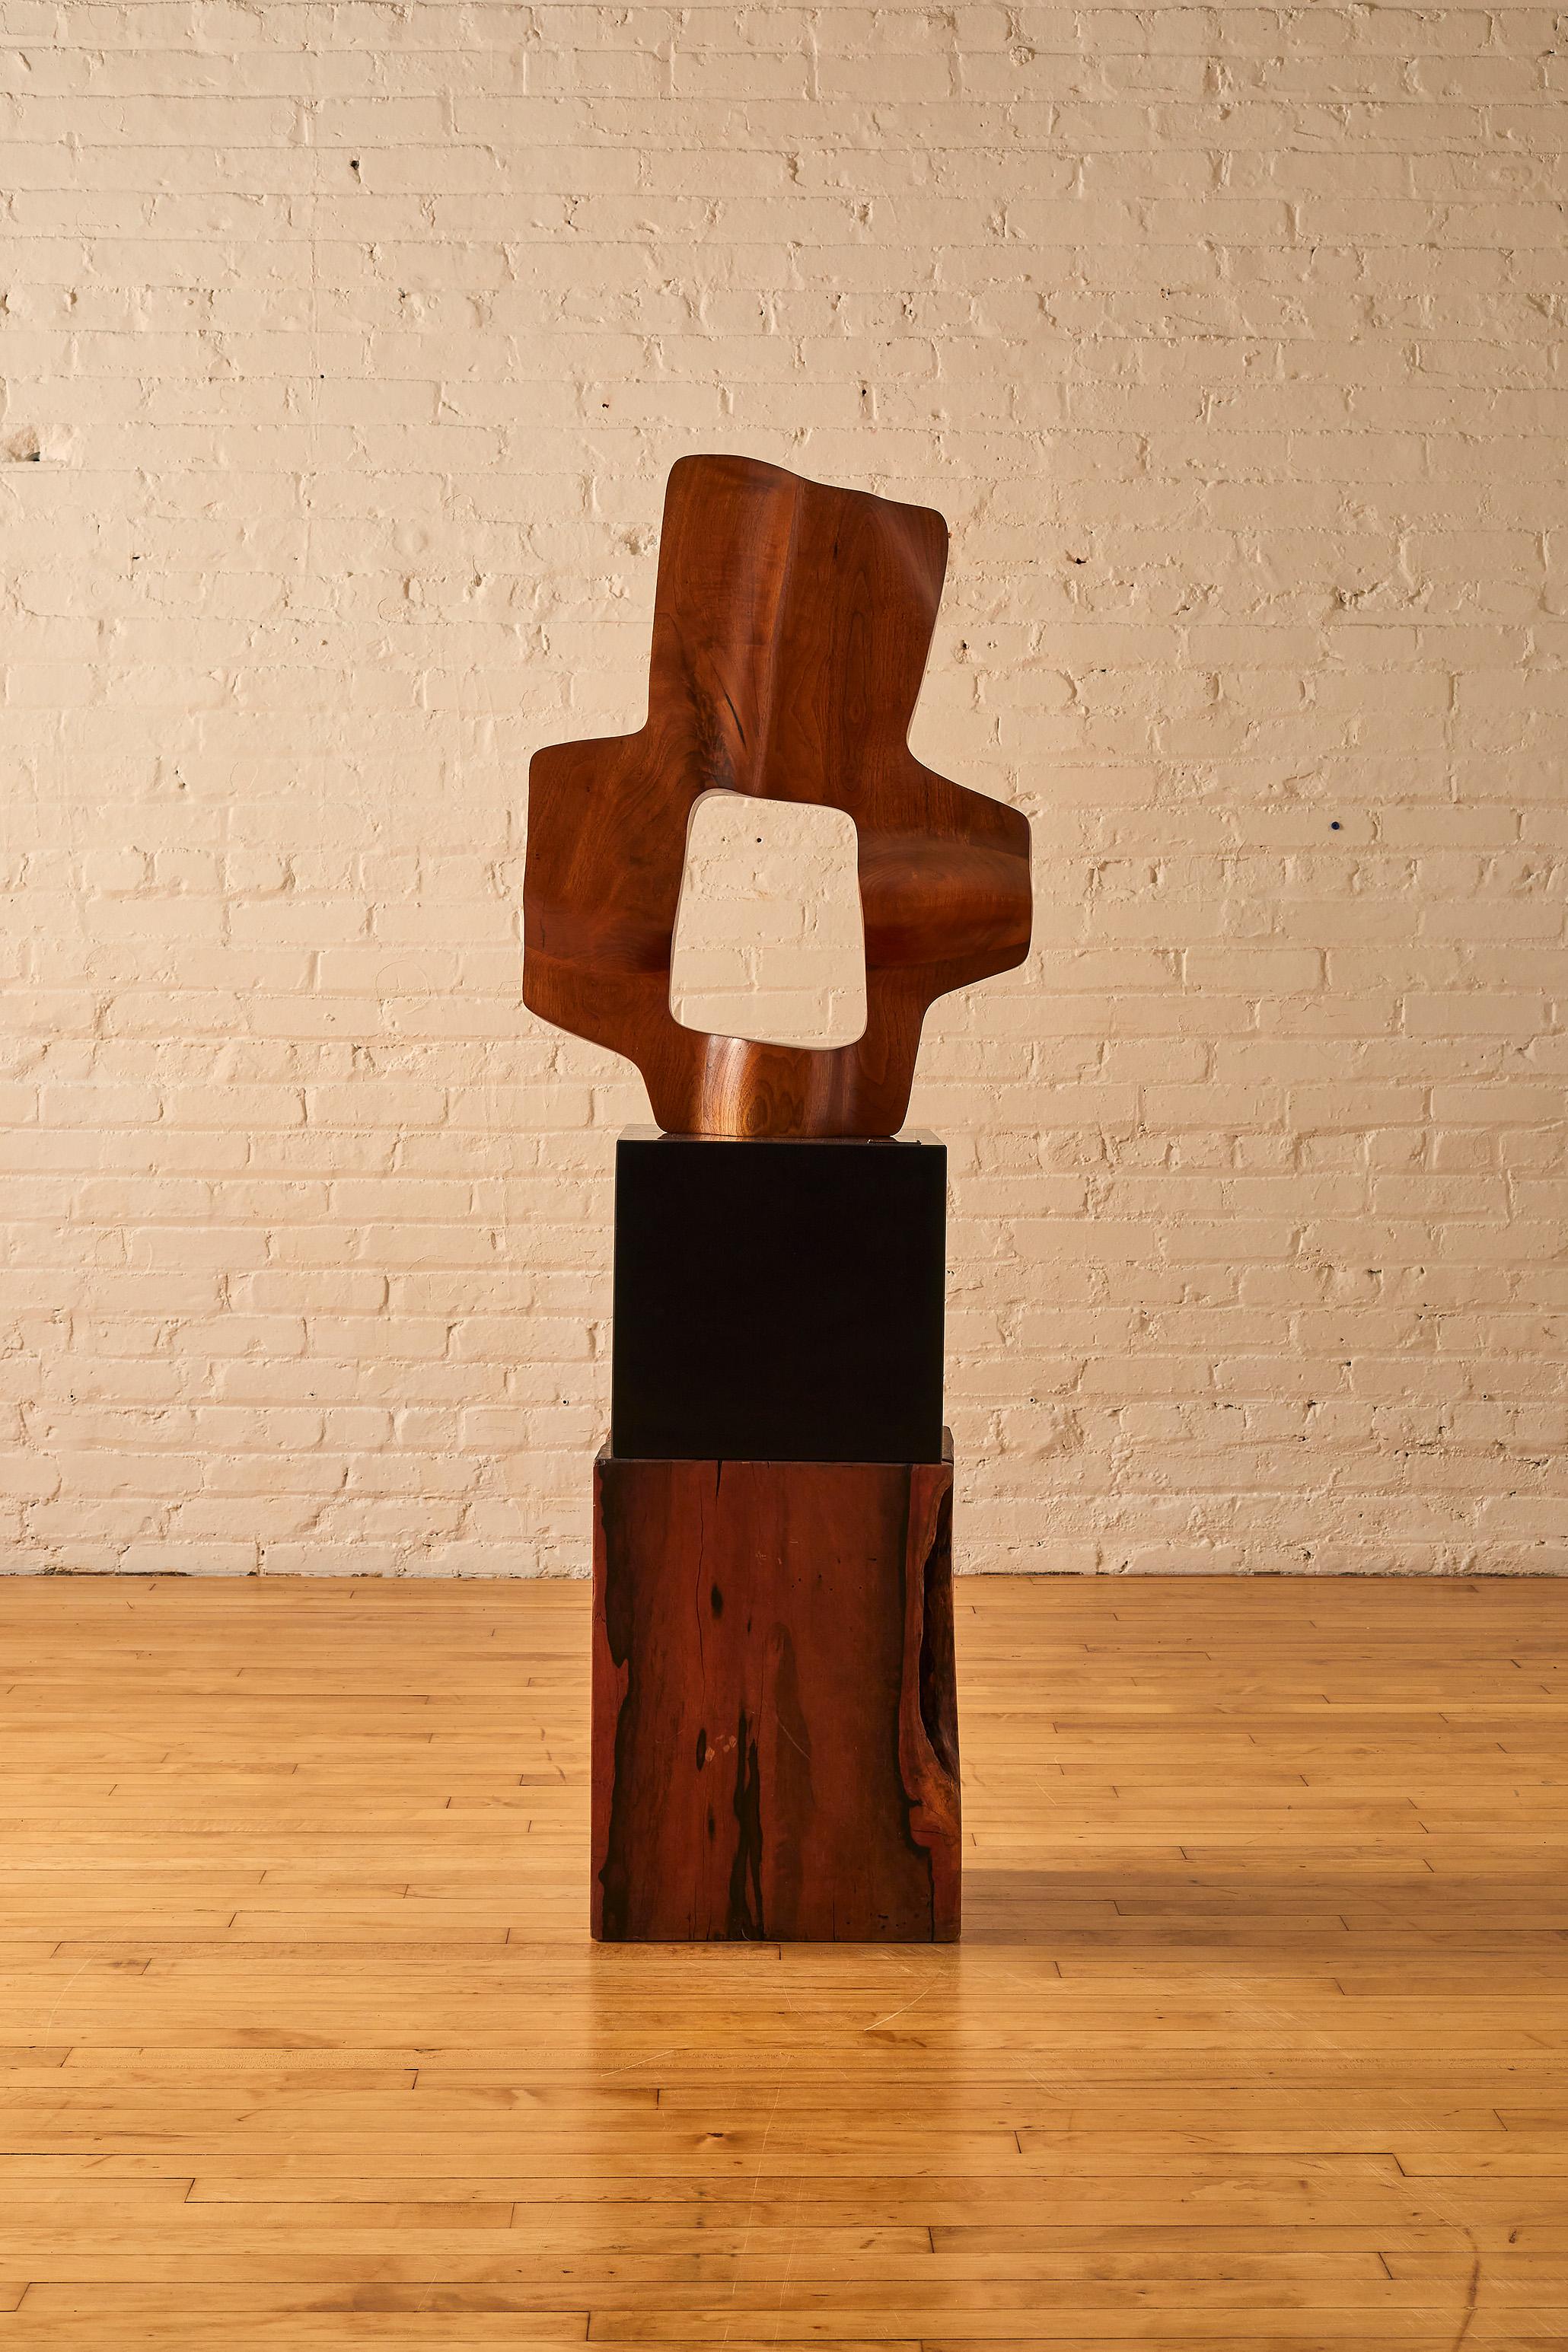 John Campbell laminated walnut sculpture, signed with a studio plaque on the base.

